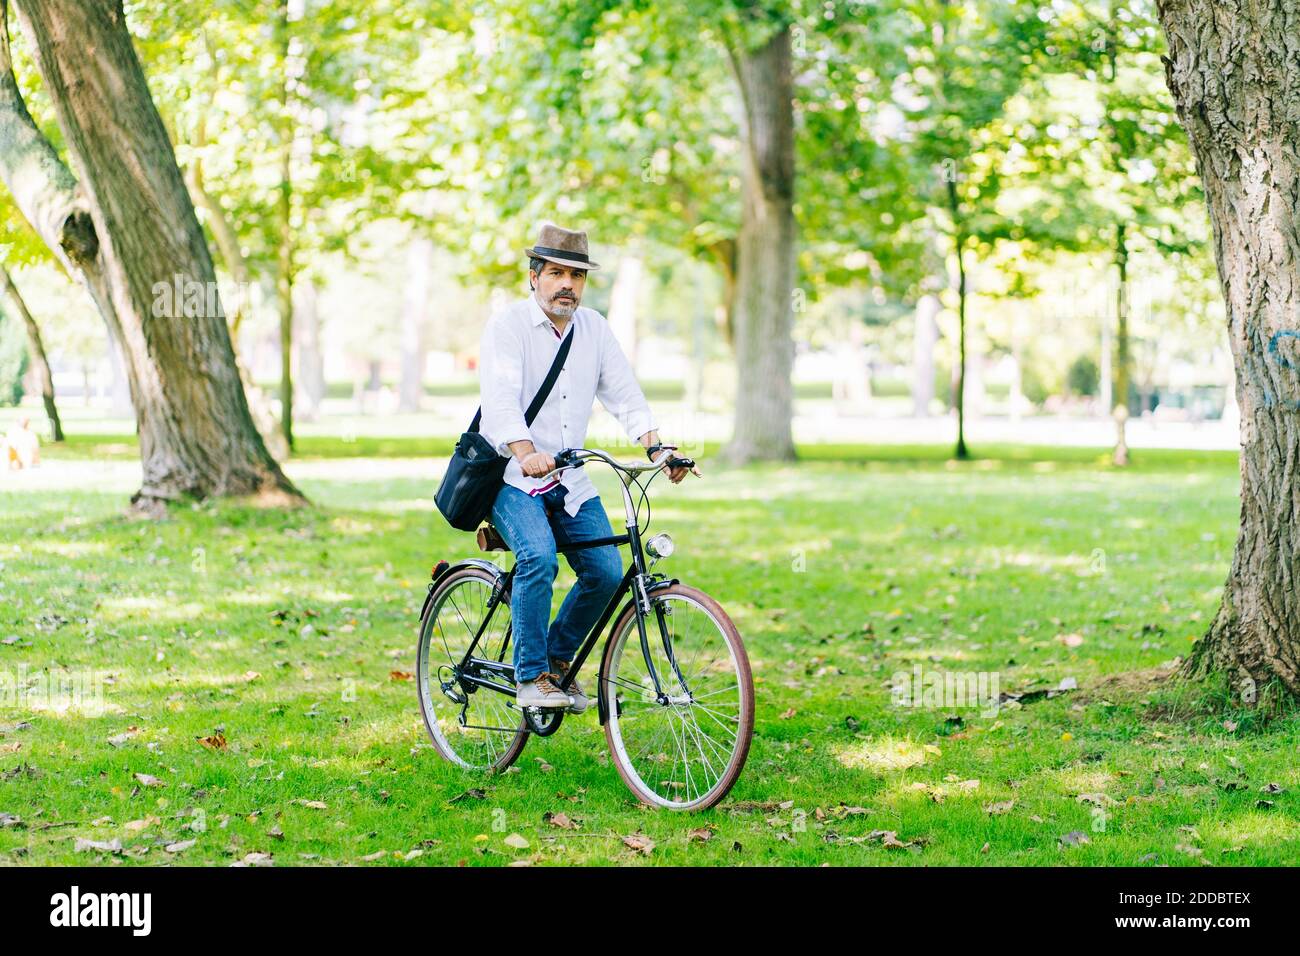 Mature man wearing hat cycling in park Stock Photo